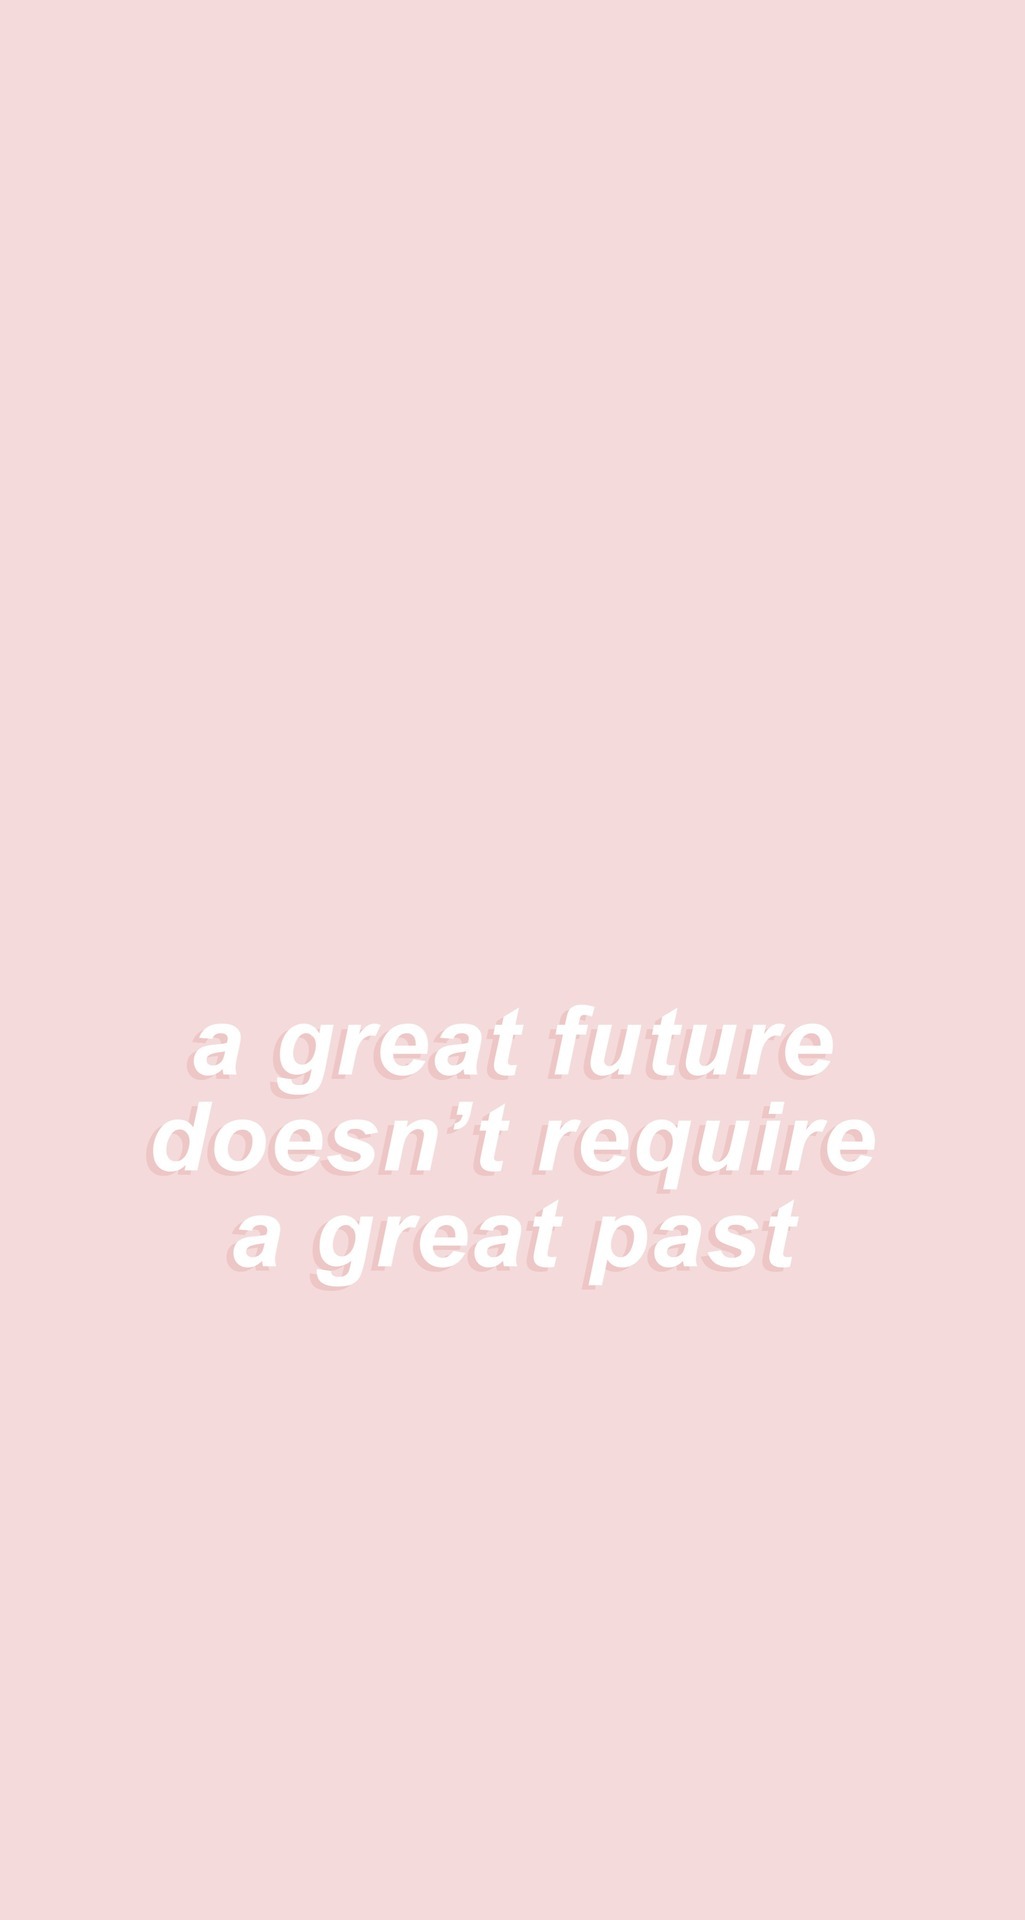 Emma S Studyblr February Pastel Quotes Phone Wallpaper Here Are